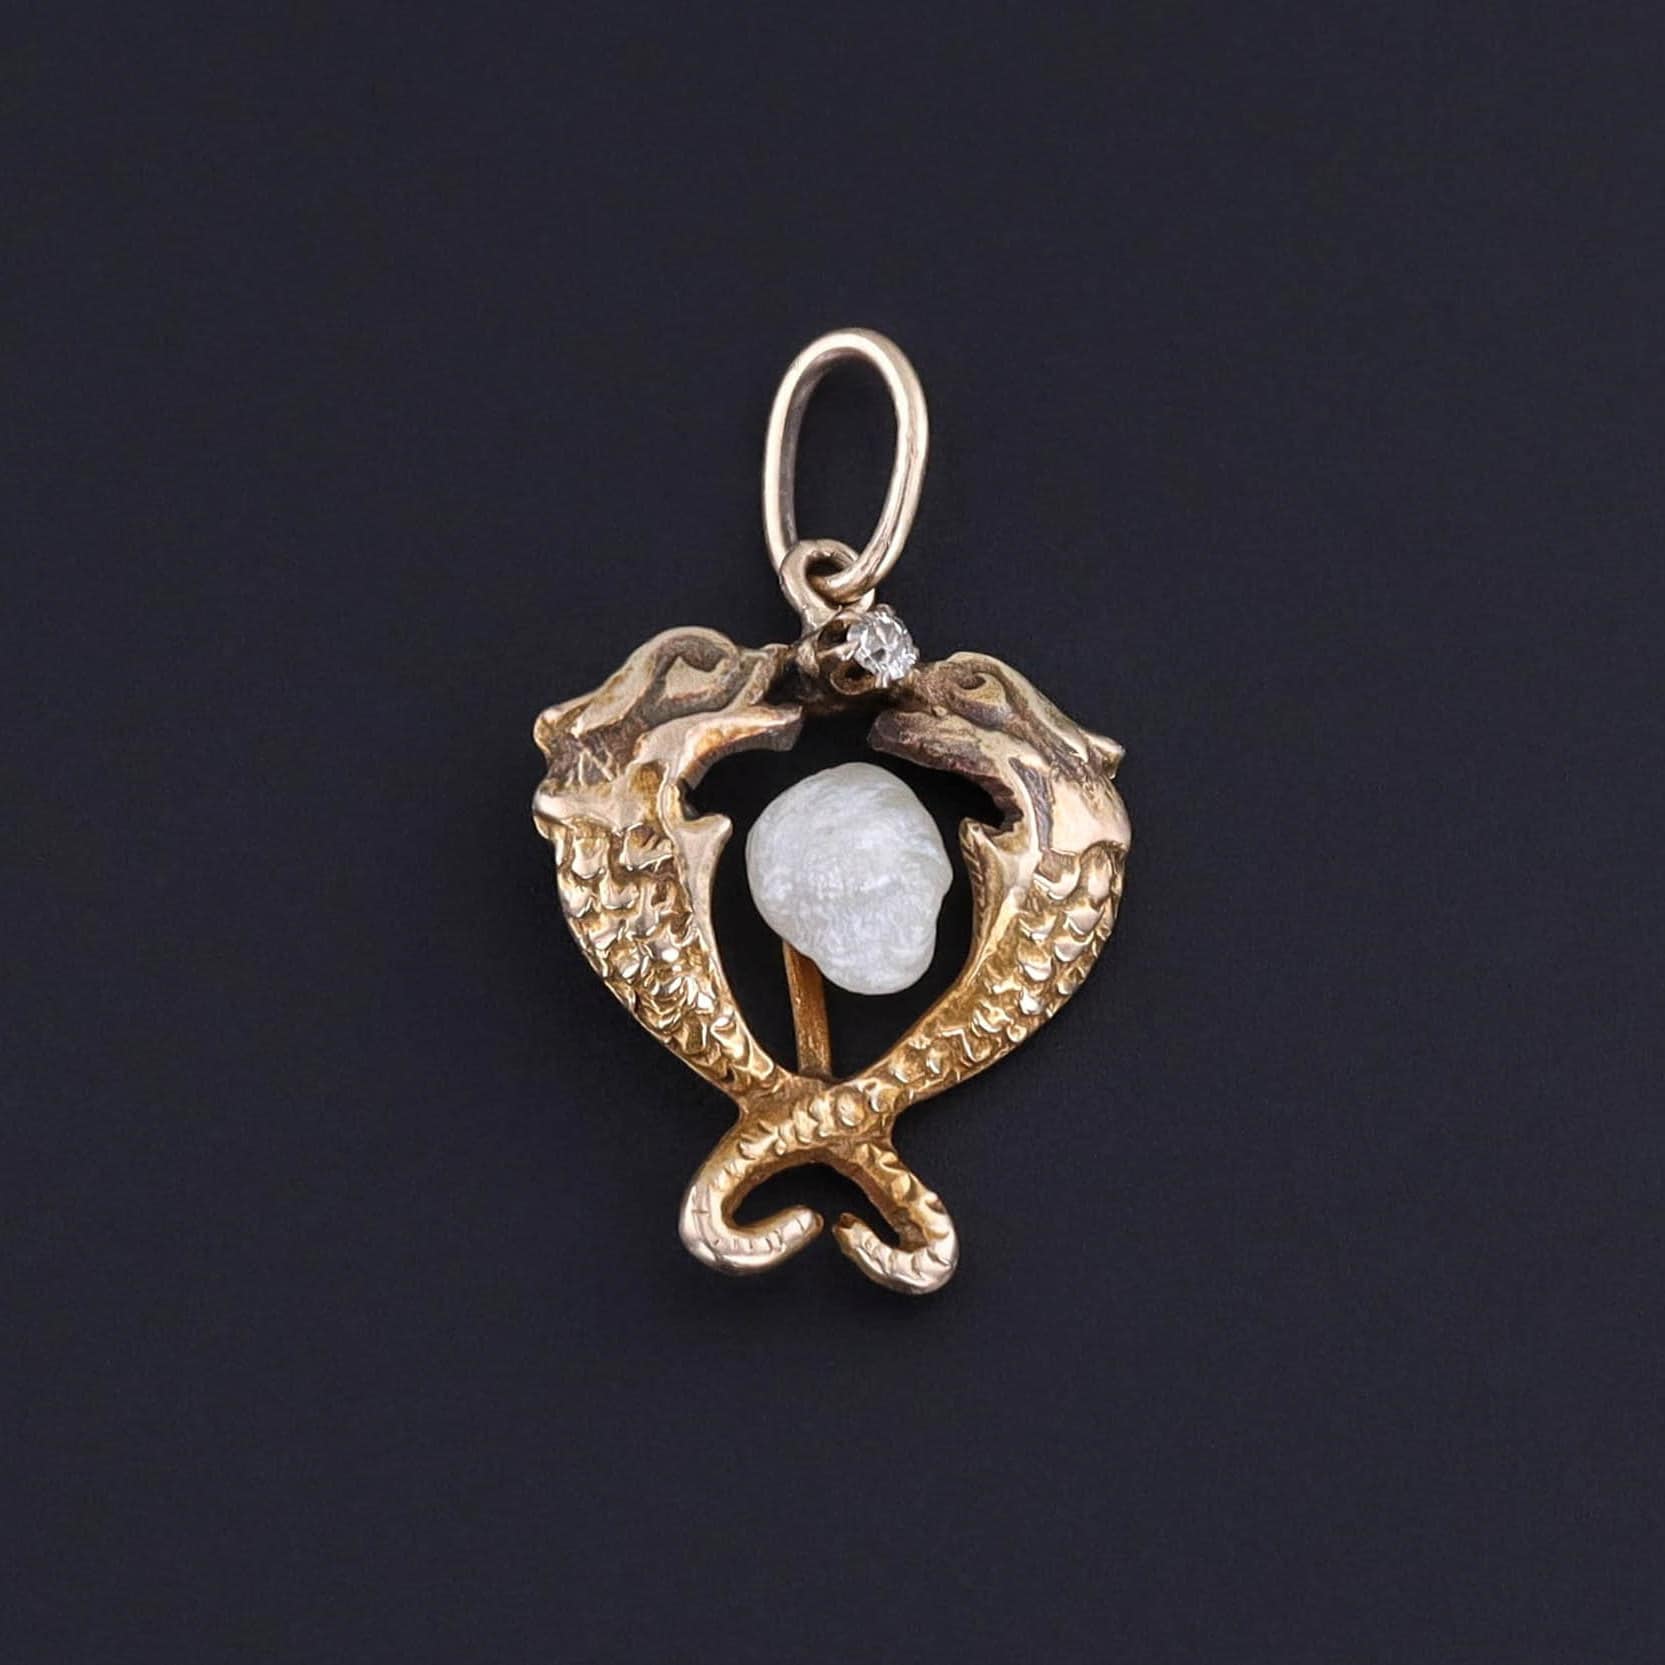 Antique Fish Charm of 14k Gold